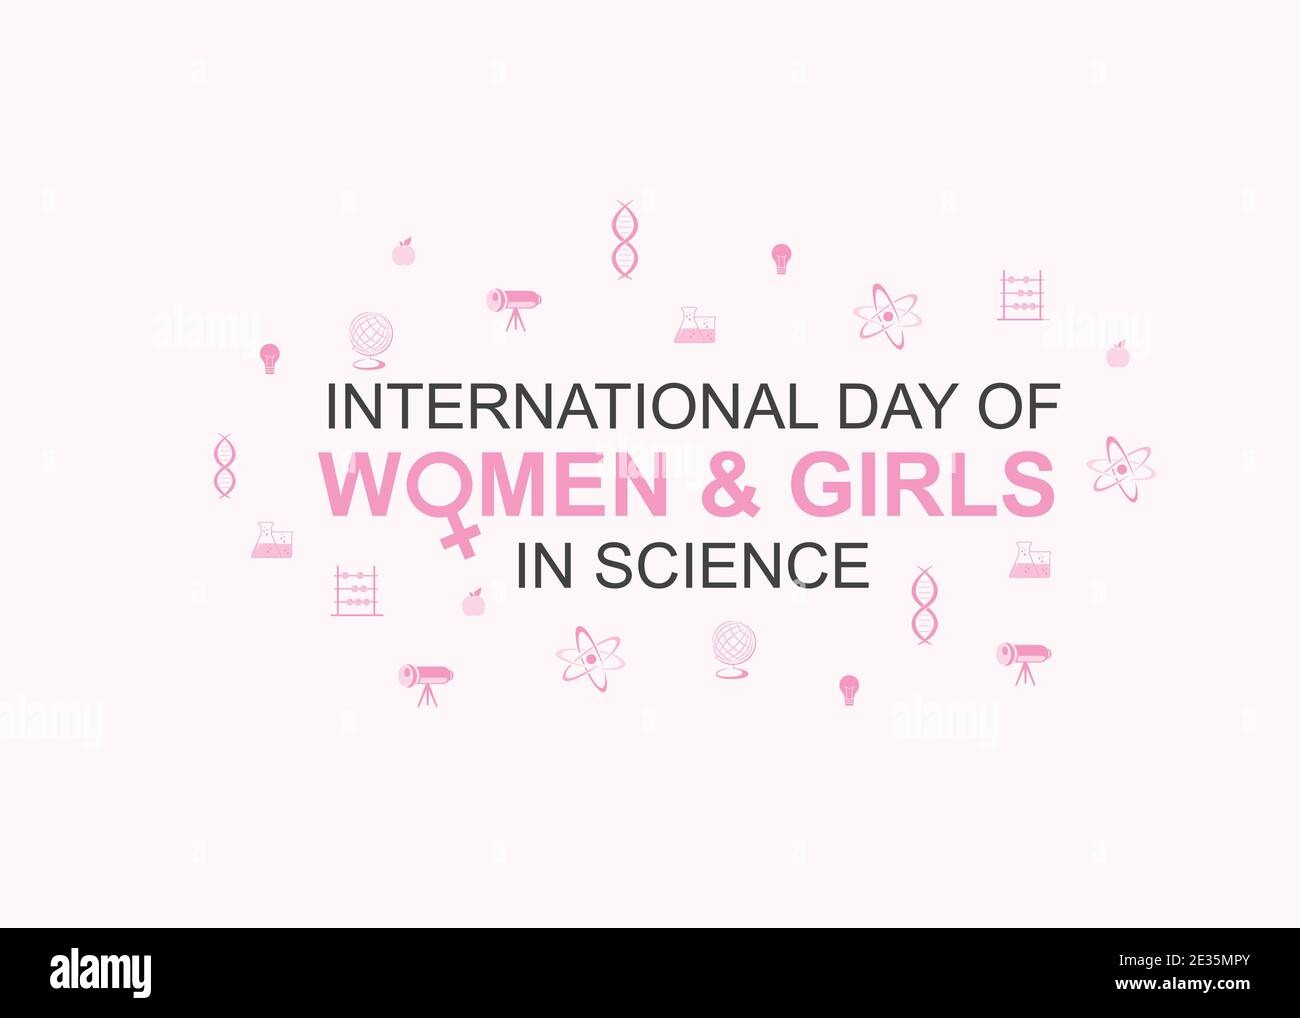 vector illustration of international day of women and girls in science Stock Vector